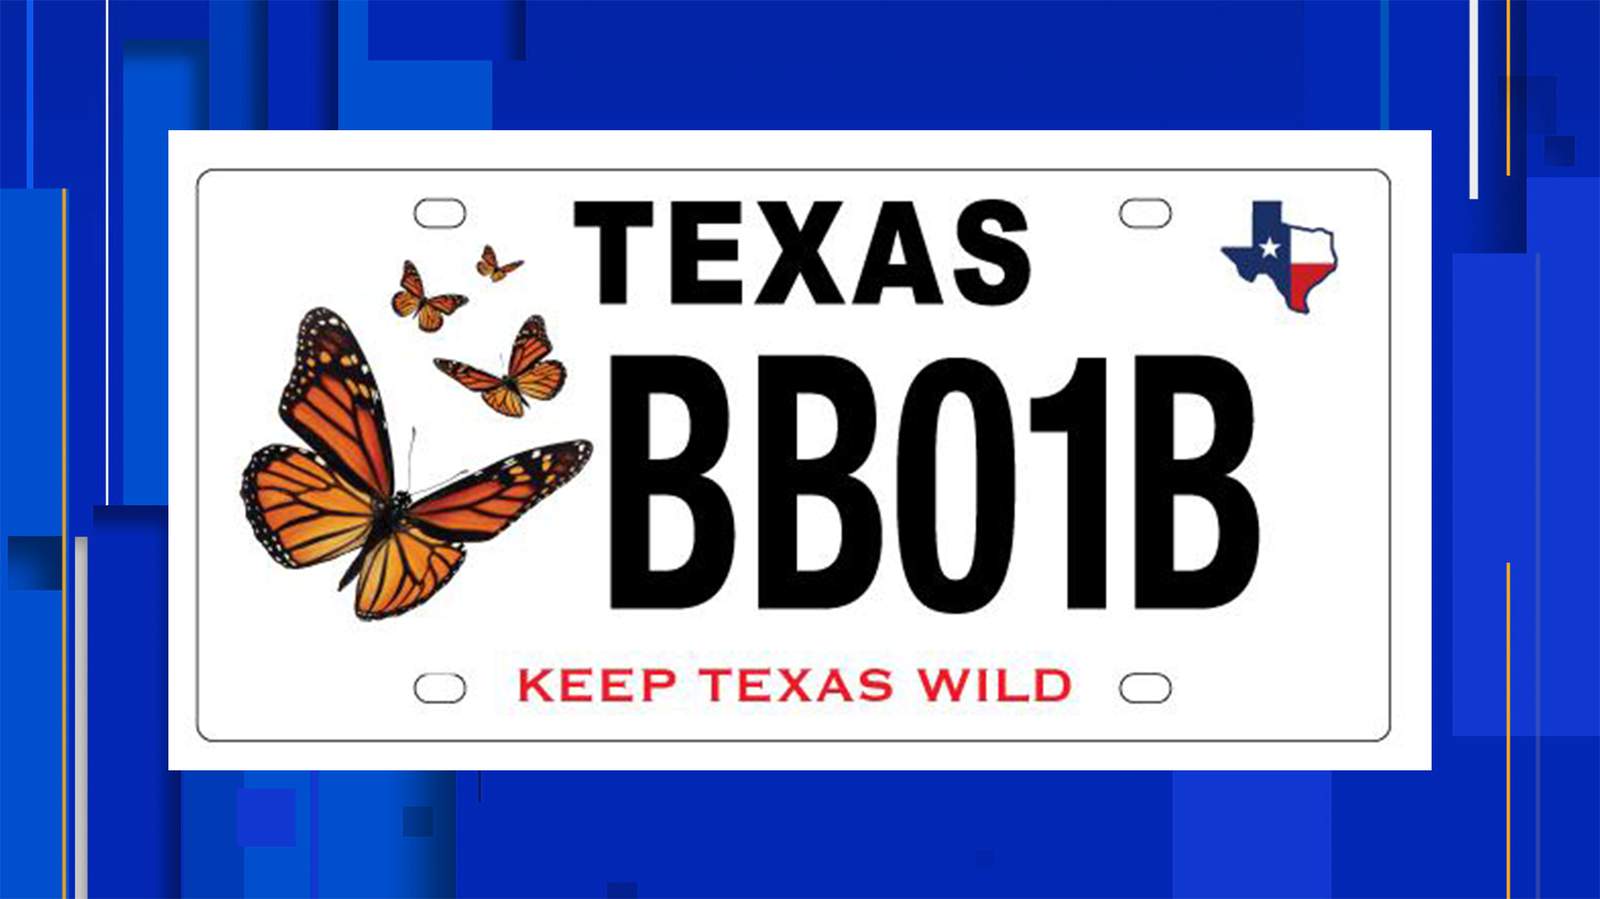 You’ll be able to support monarch butterflies with this new Texas license plate